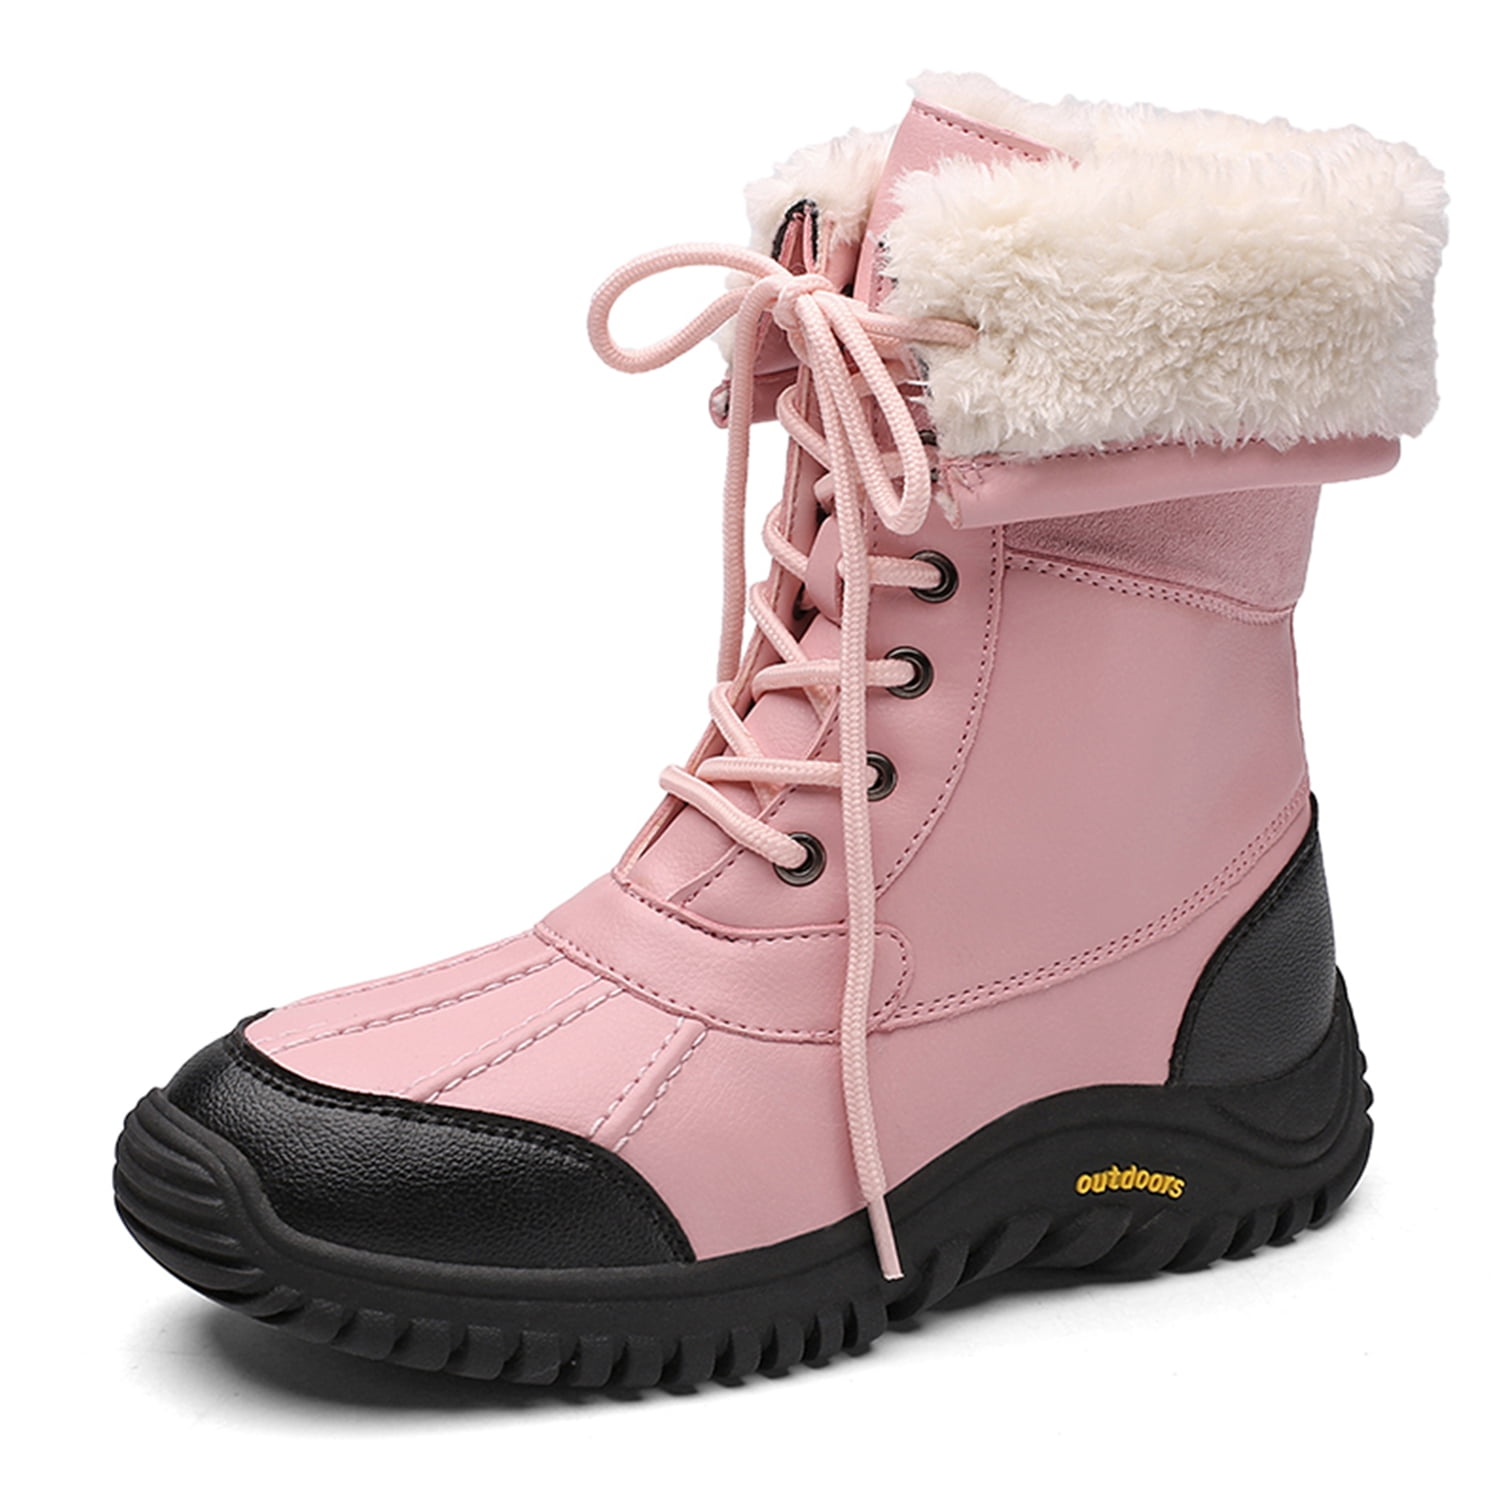 Women Winter Suede Flat Boot Lace Up Outdoor Faxu Fur Lined Work Snow Boots Shoe 